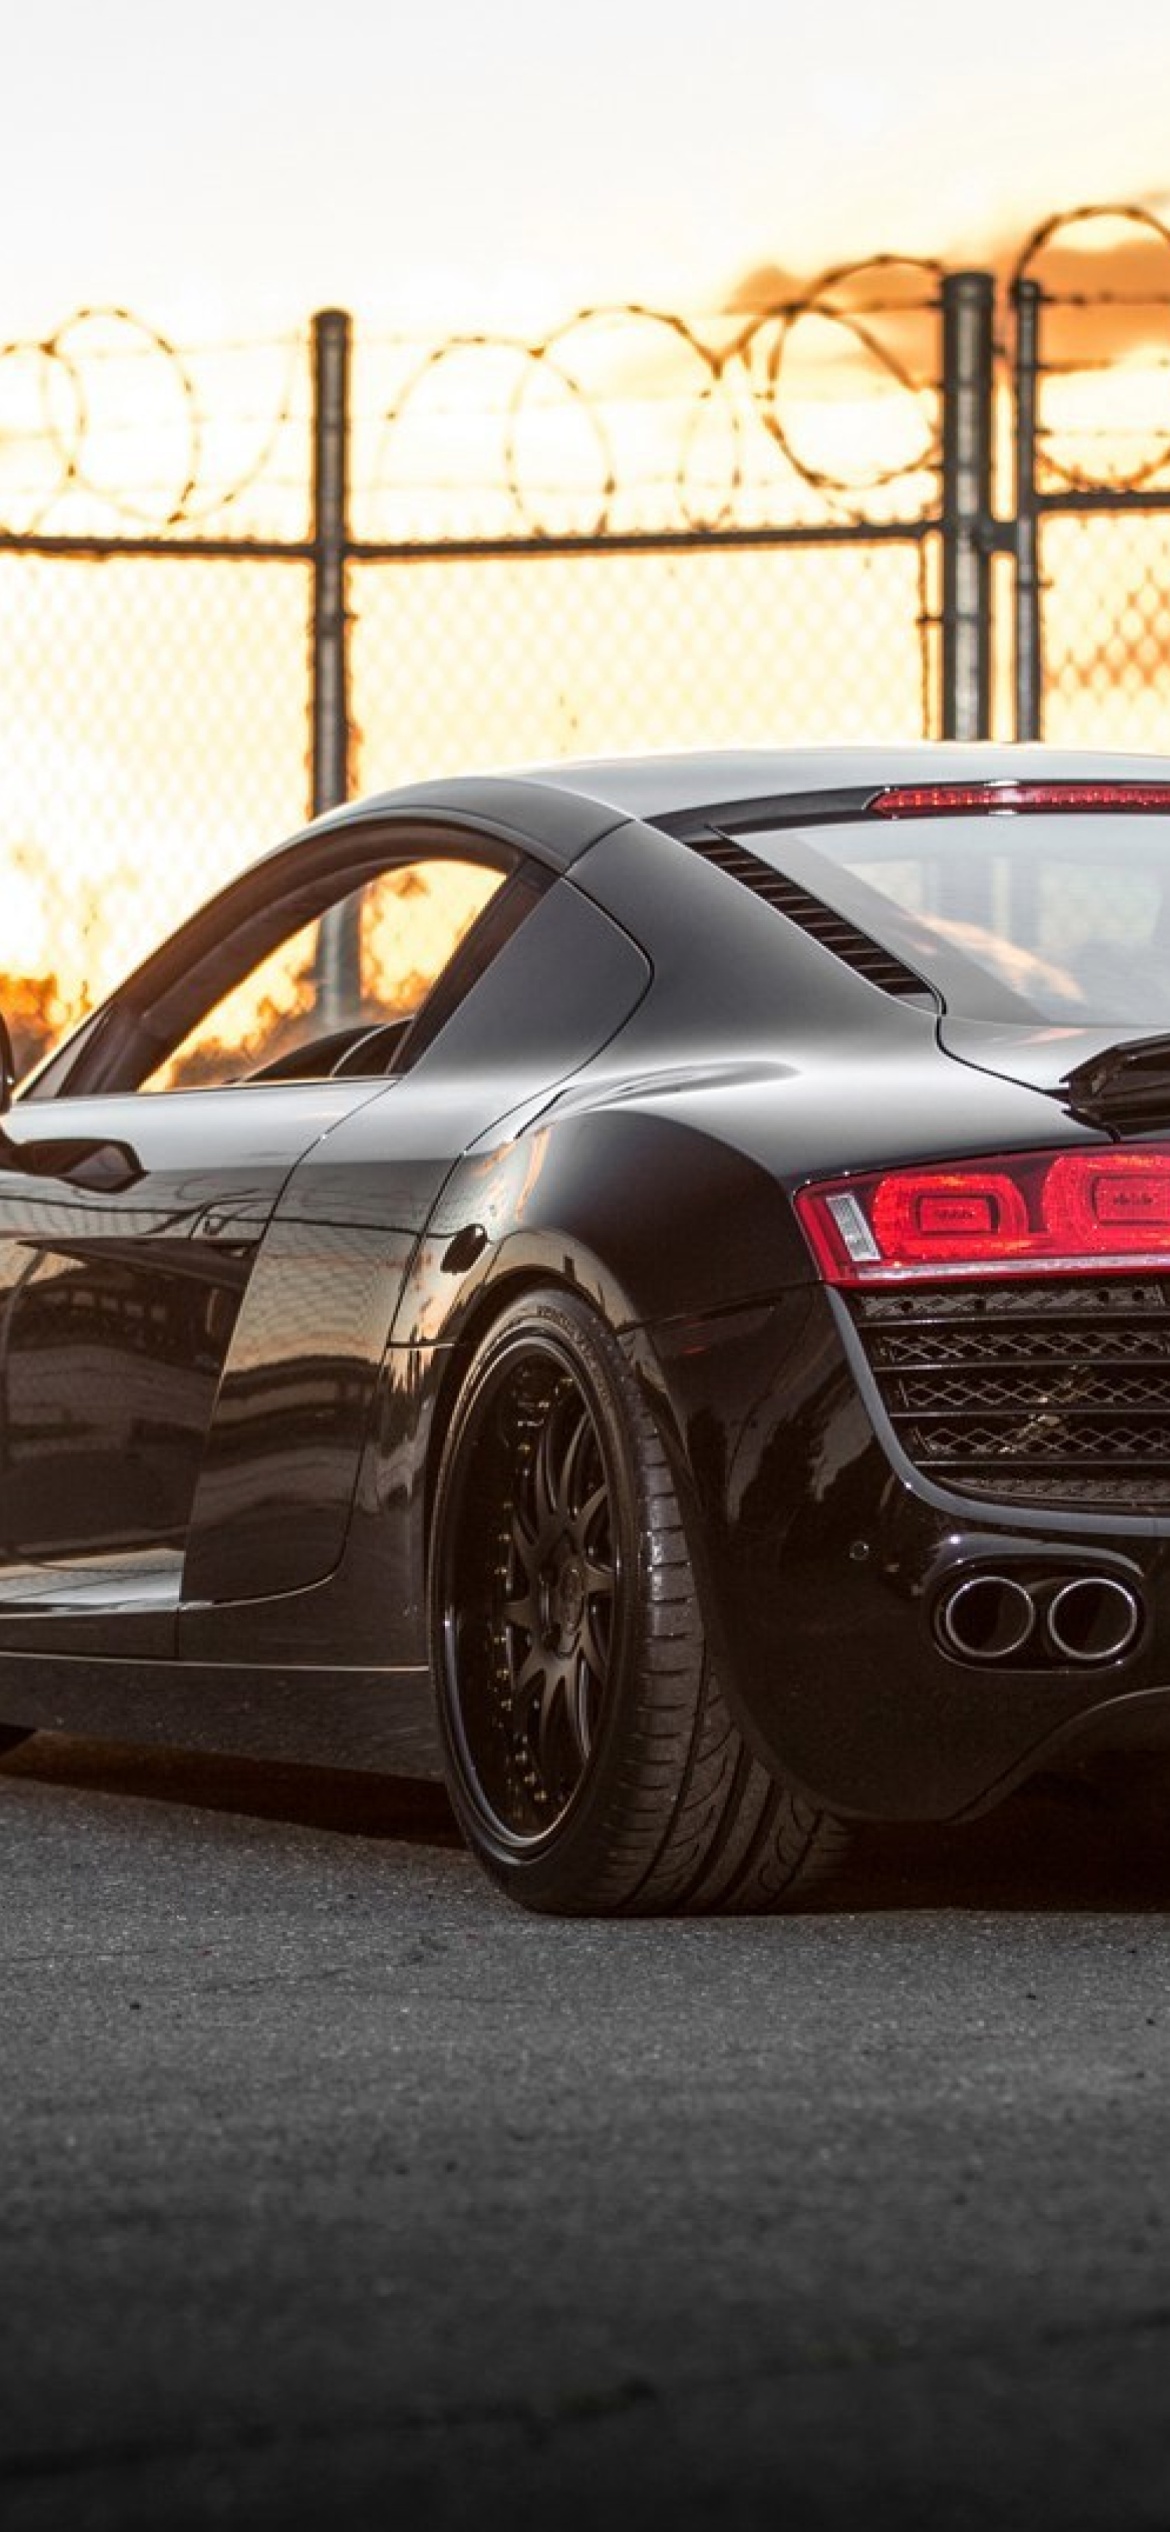 Audi R8 Wallpaper for iPhone 12 Pro